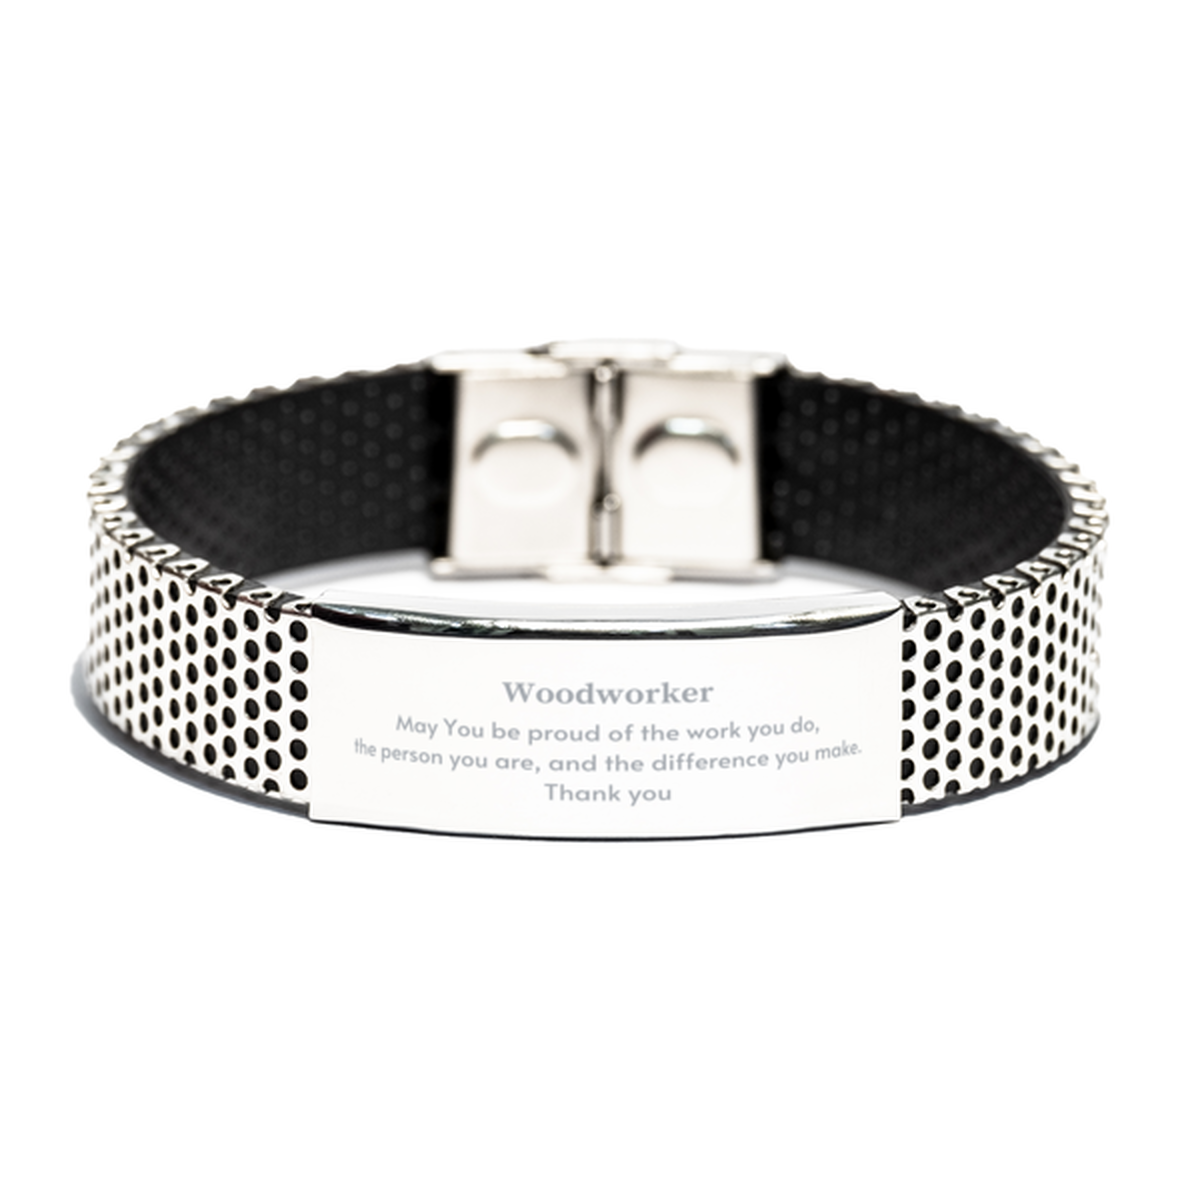 Heartwarming Stainless Steel Bracelet Retirement Coworkers Gifts for Woodworker, Woodworker May You be proud of the work you do, the person you are Gifts for Boss Men Women Friends